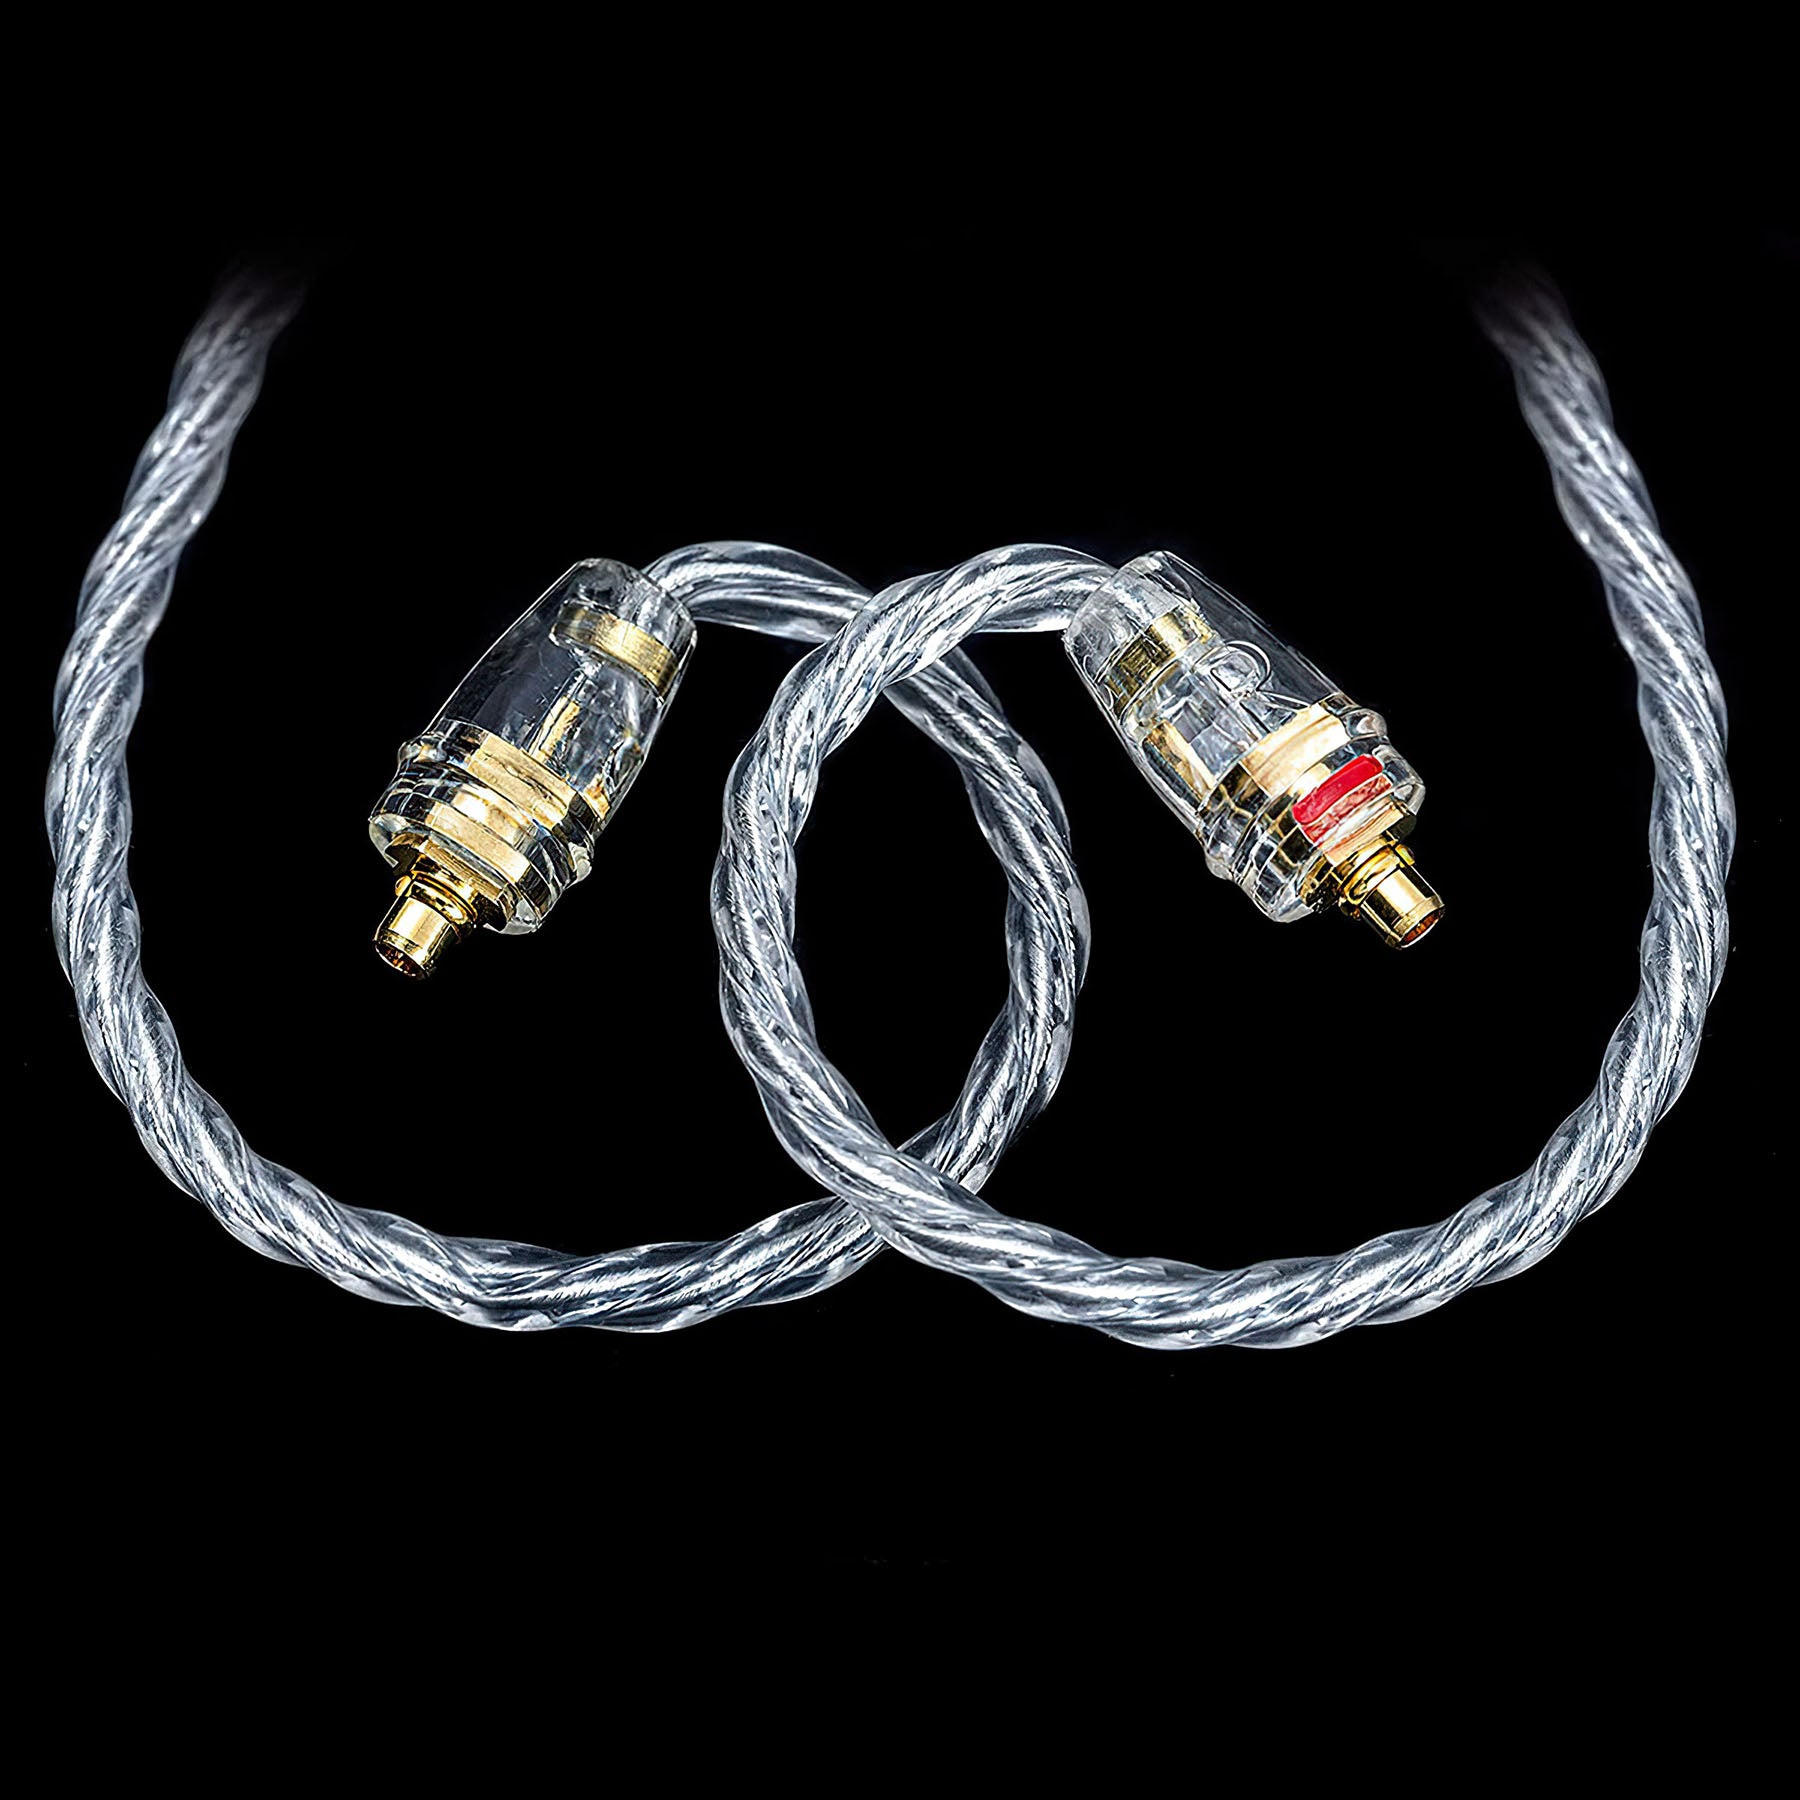 Meze Audio MMCX Silver Plated Upgrade